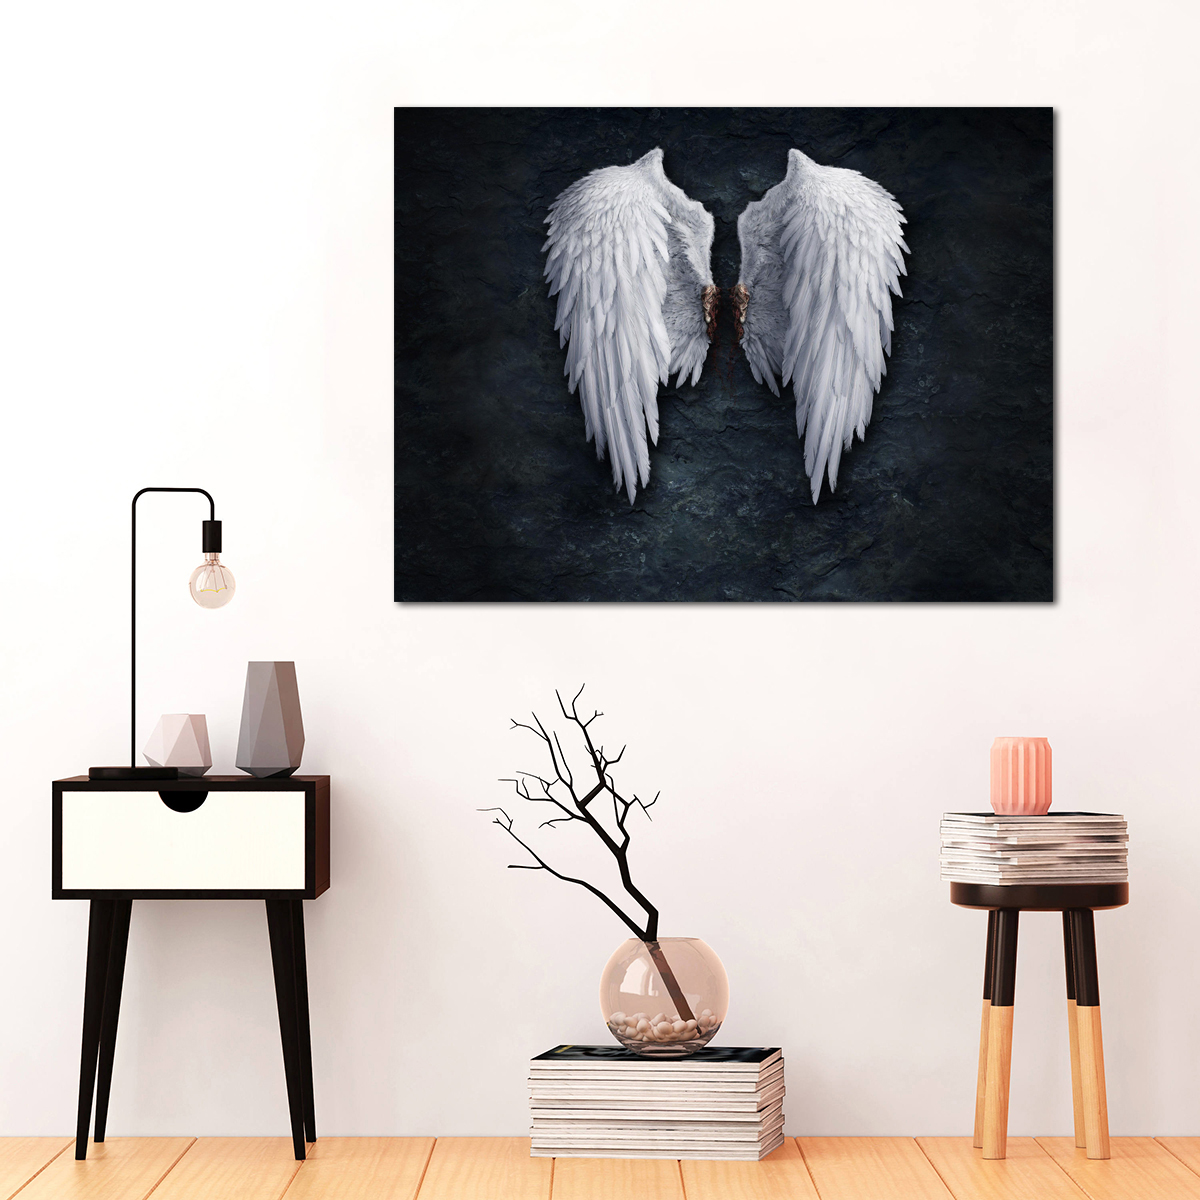 1Pc-Wall-Decorative-Painting-Angel-Wings-Canvas-Print-Wall-Decor-Art-Pictures-Frameless-Wall-Hanging-1725089-2